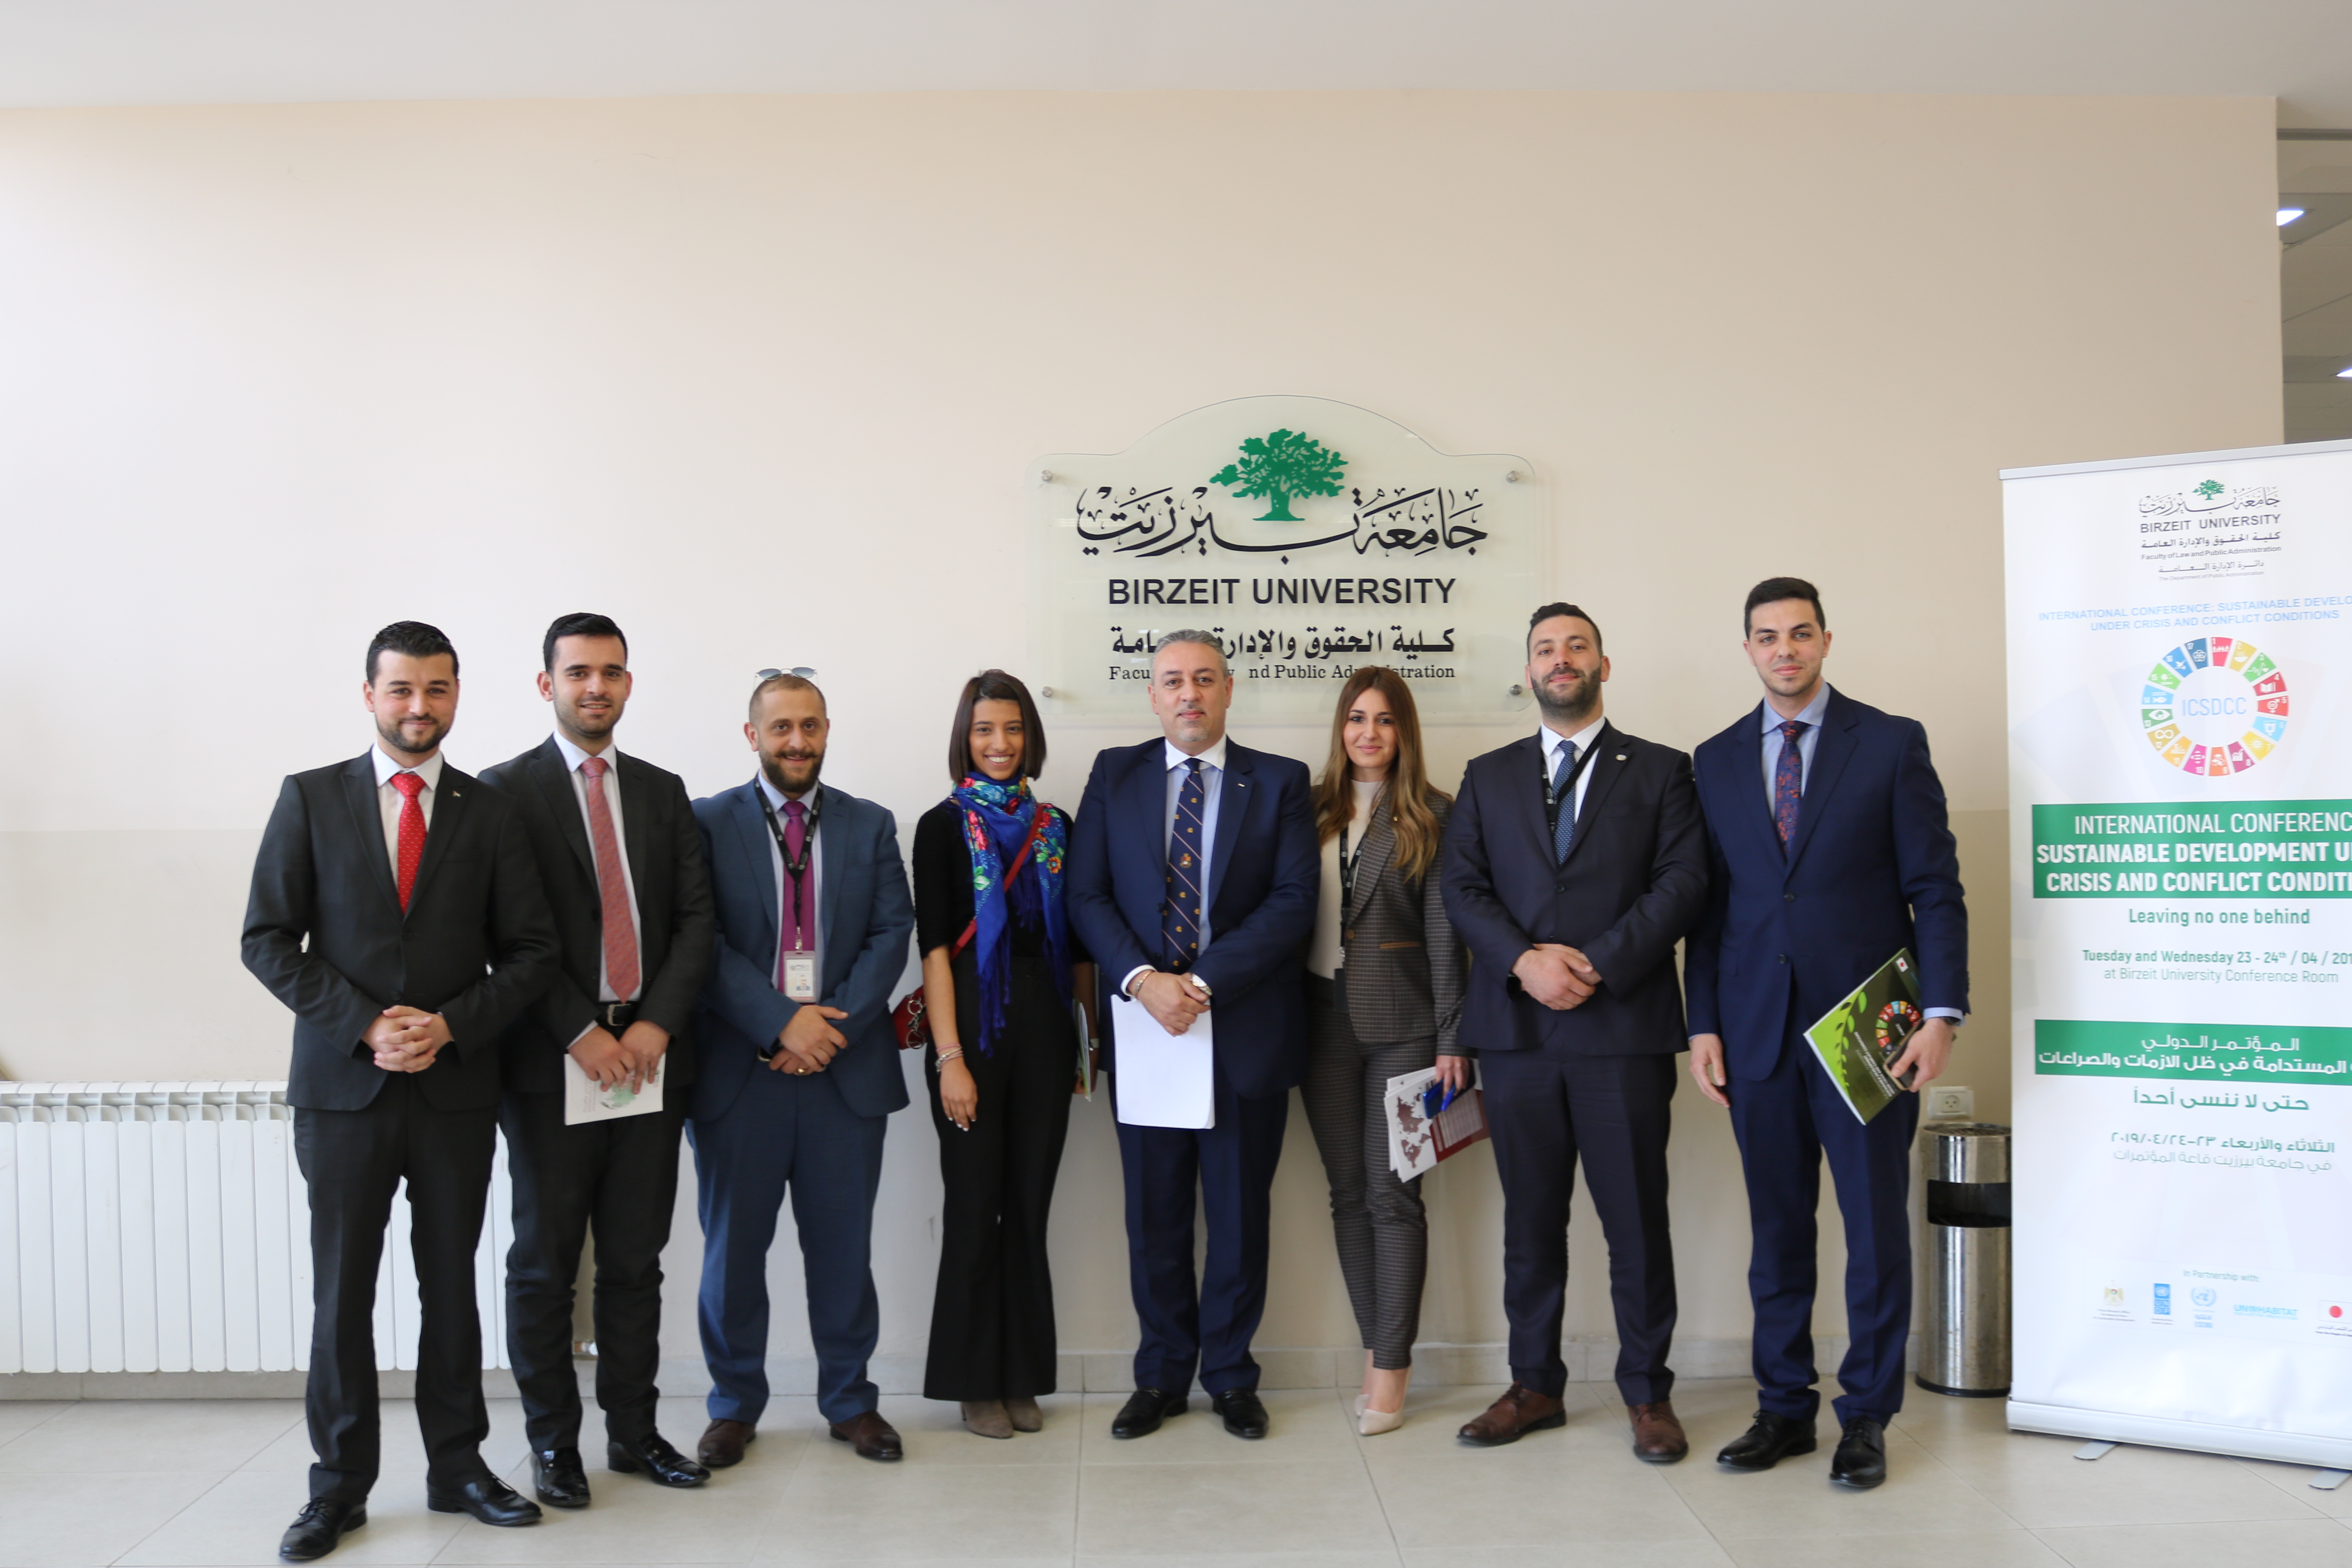 The Palestinian International Cooperation Agency participates in the Conference “Sustainable Development under Crisis and Conflict conditions (IDSDCC)” organized by Birzeit University and presents a research paper